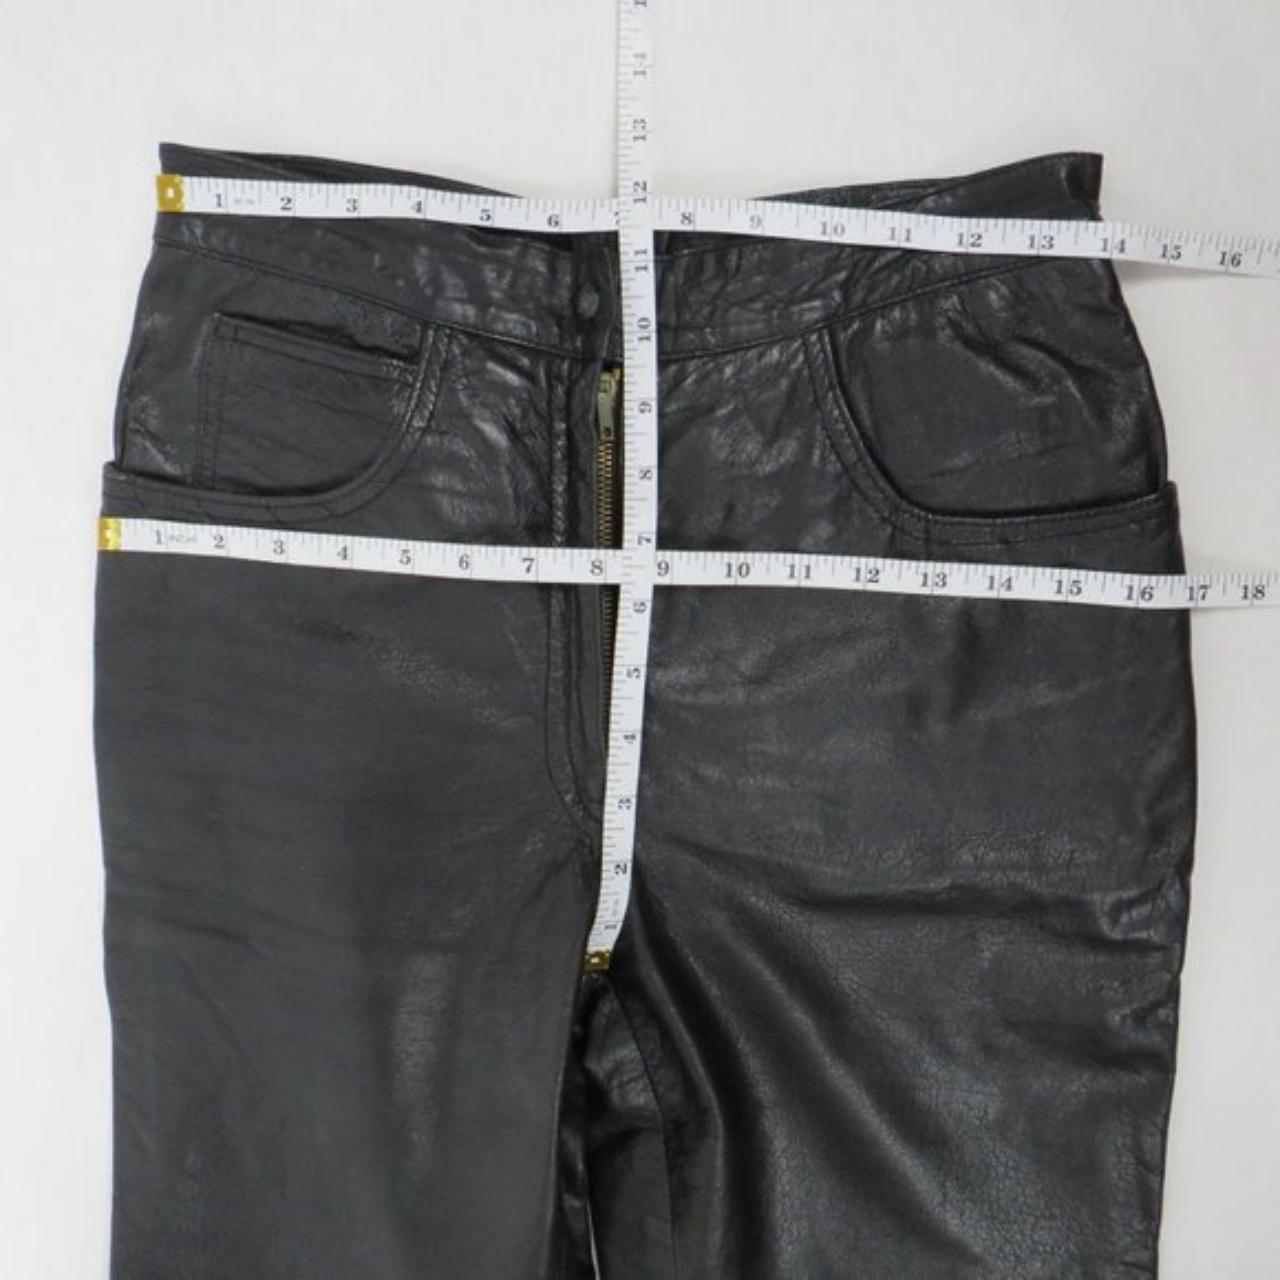 Pacesetter black leather high-rise pants with 3... - Depop